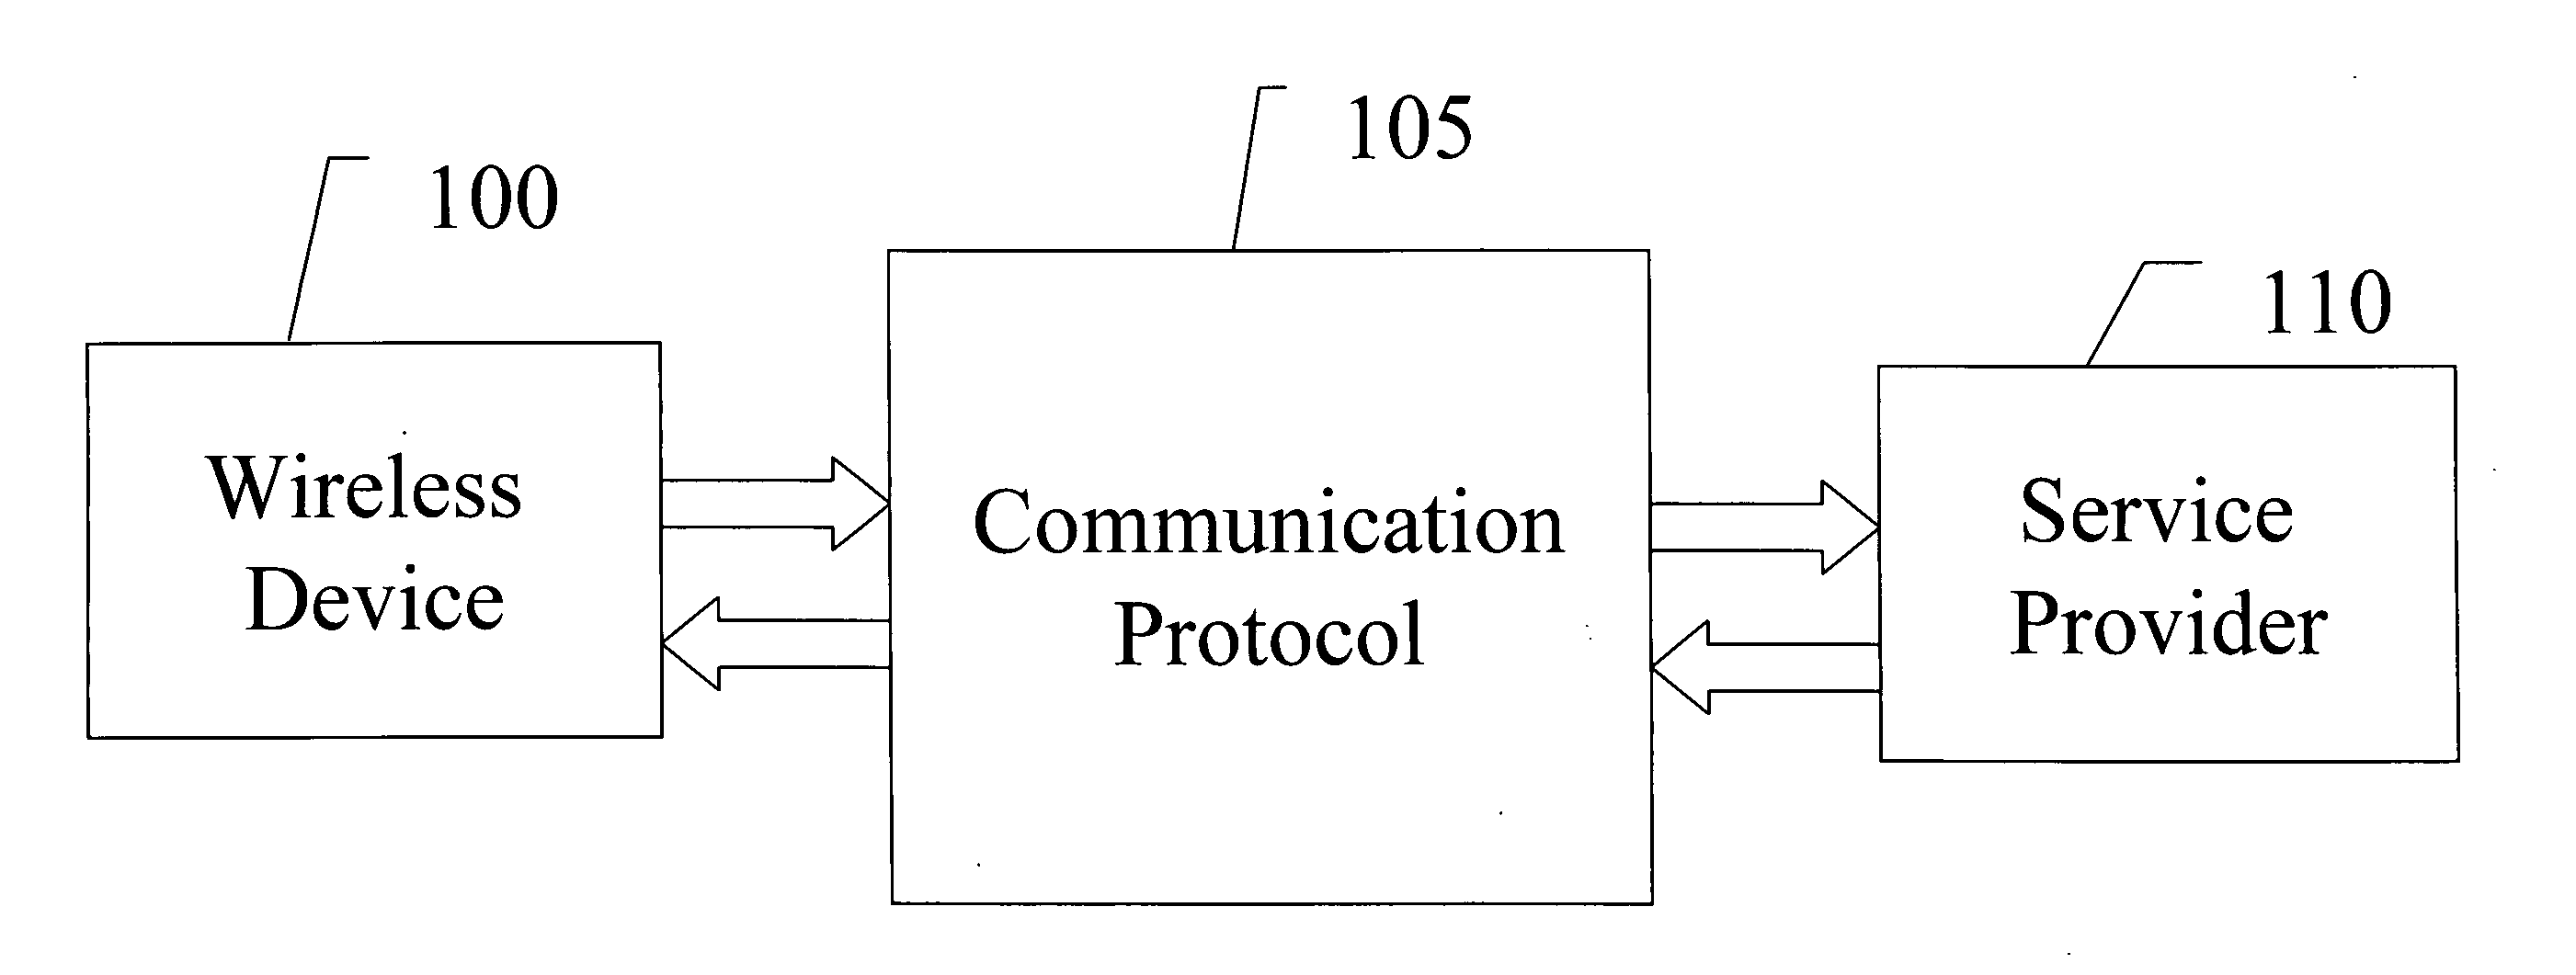 Method and system for conducting financial and non-financial transactions using a wireless device